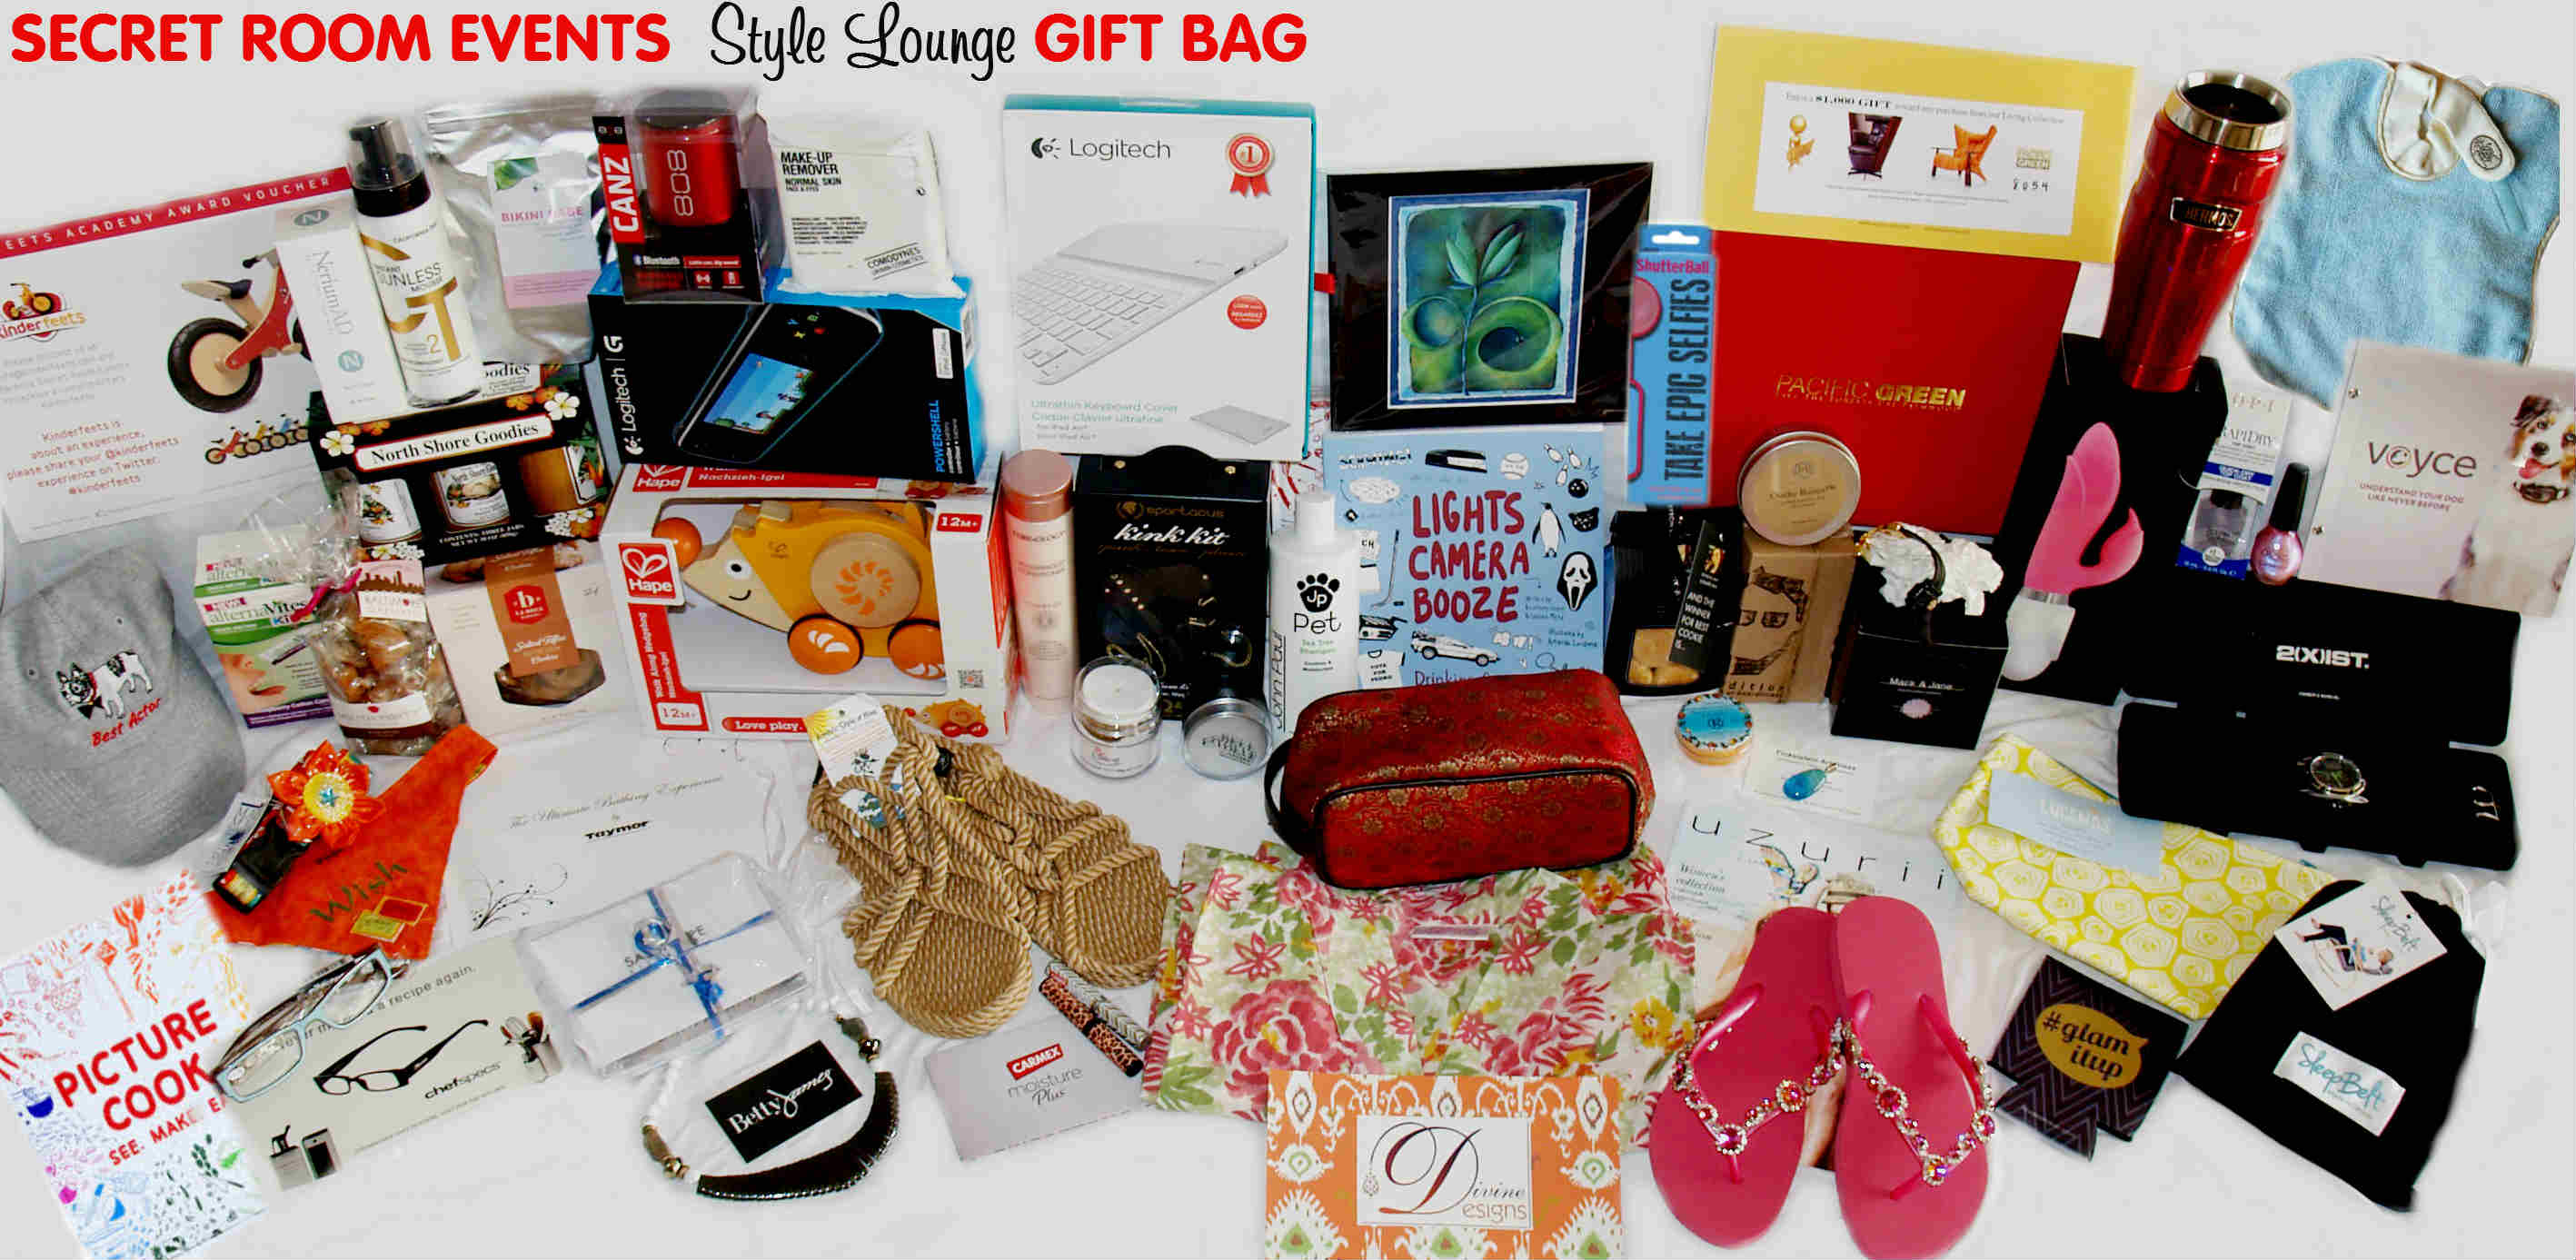 Secret Room Events Red Carpet Style Lounge Celebrity Nominee Gift Bag in Honor of the 86th Academy Awards